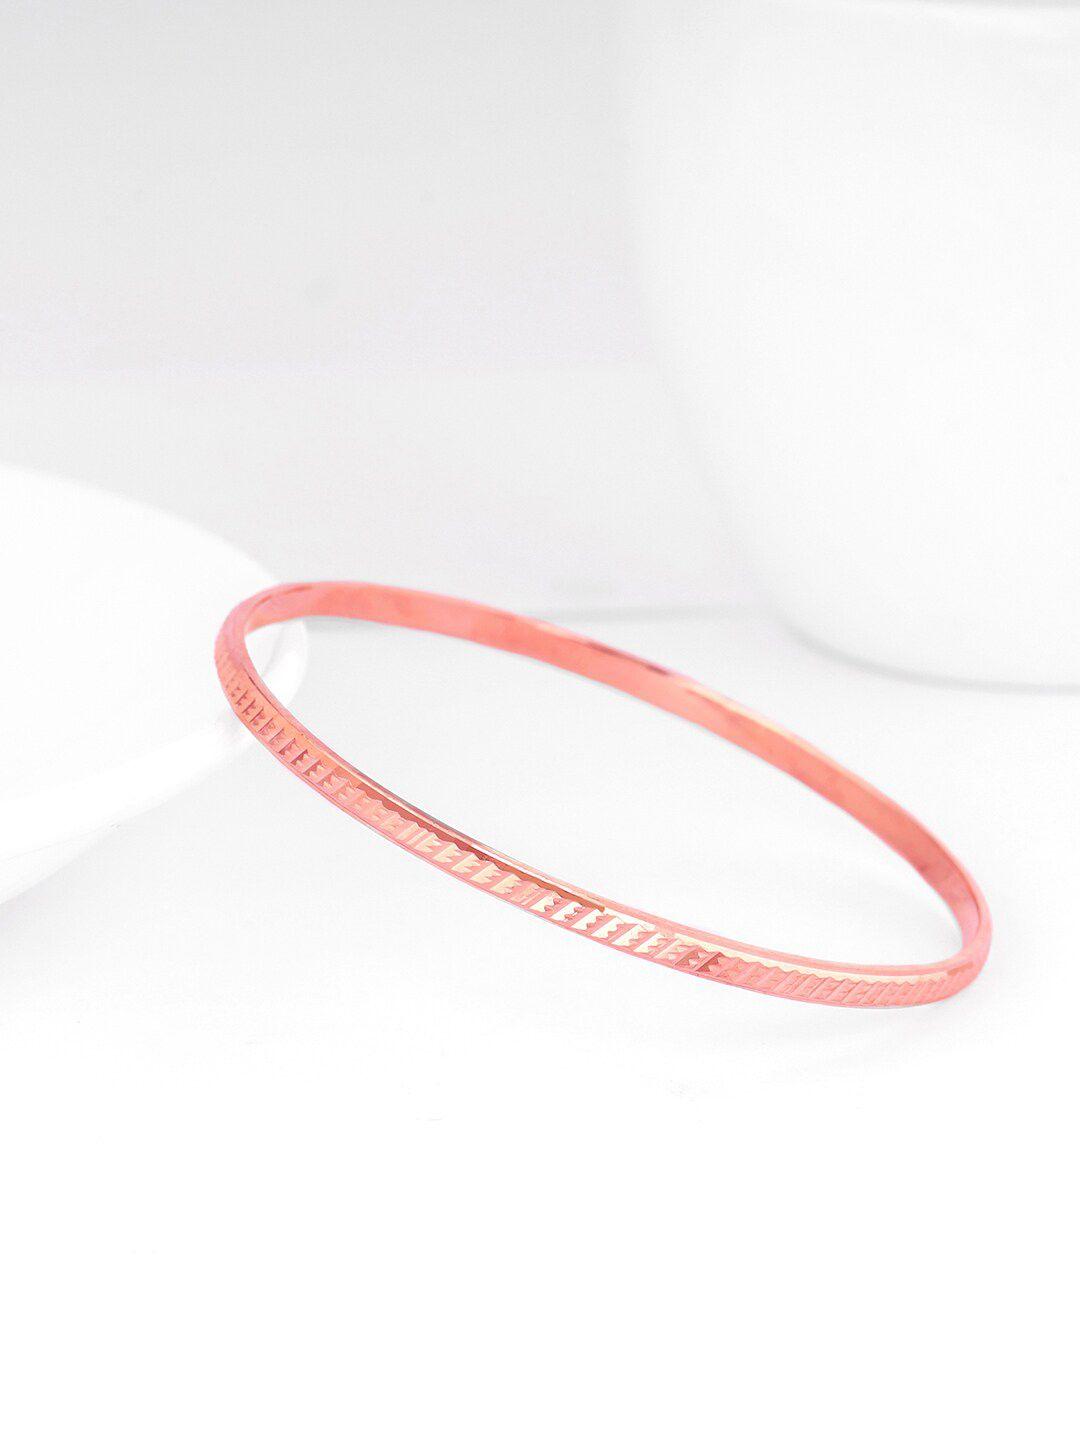 giva-925-sterling-silver-rose-gold-plated-bangle